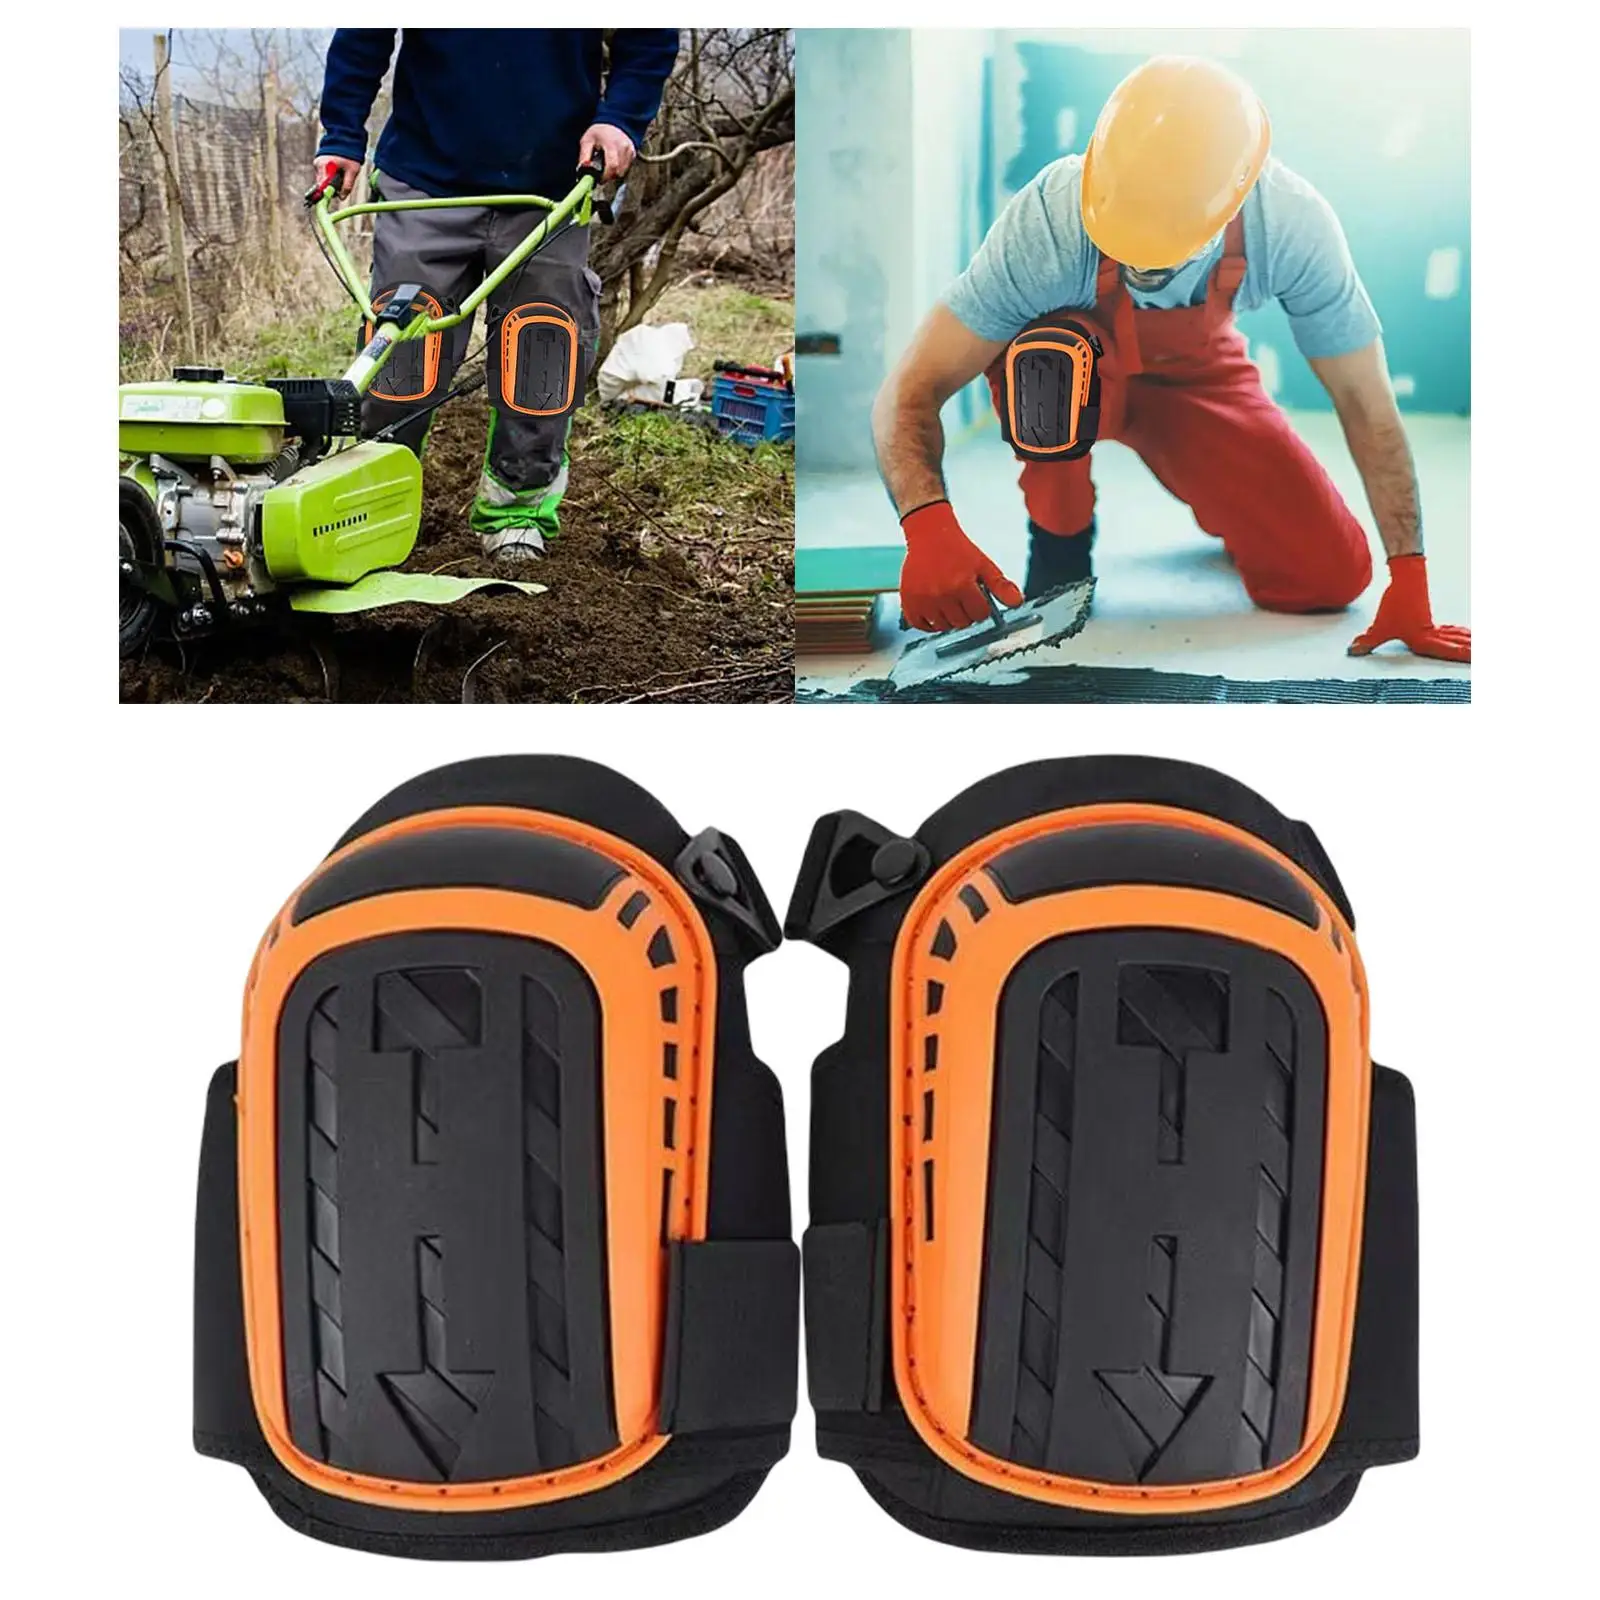 Adjustable Straps Knee Pads 2x Strong Stretchable Straps Heavy Duty Comfortable Knee Pads for Work for Skating Adults Garden